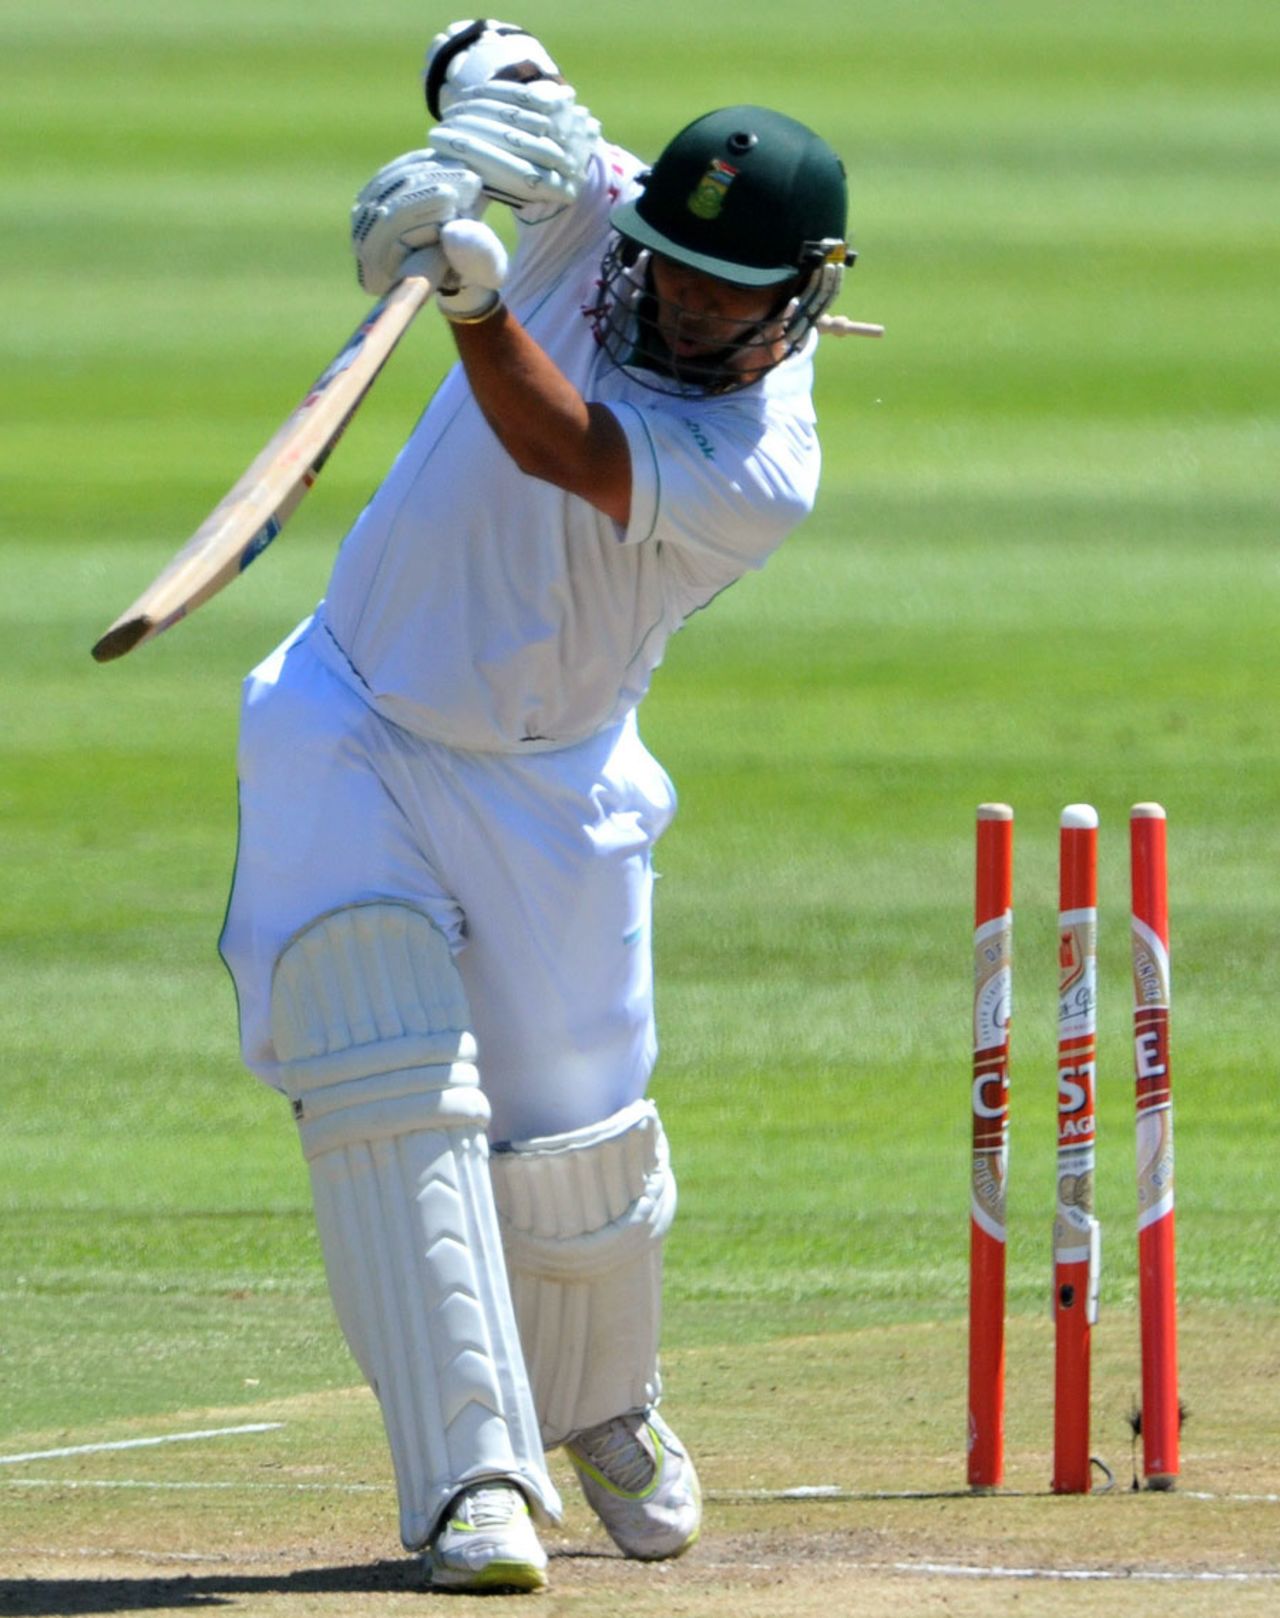 Ashwell Prince loses his bails to a peach from Sreesanth, South Africa v India, 3rd Test, Cape Town, 2nd day, January 3, 2011